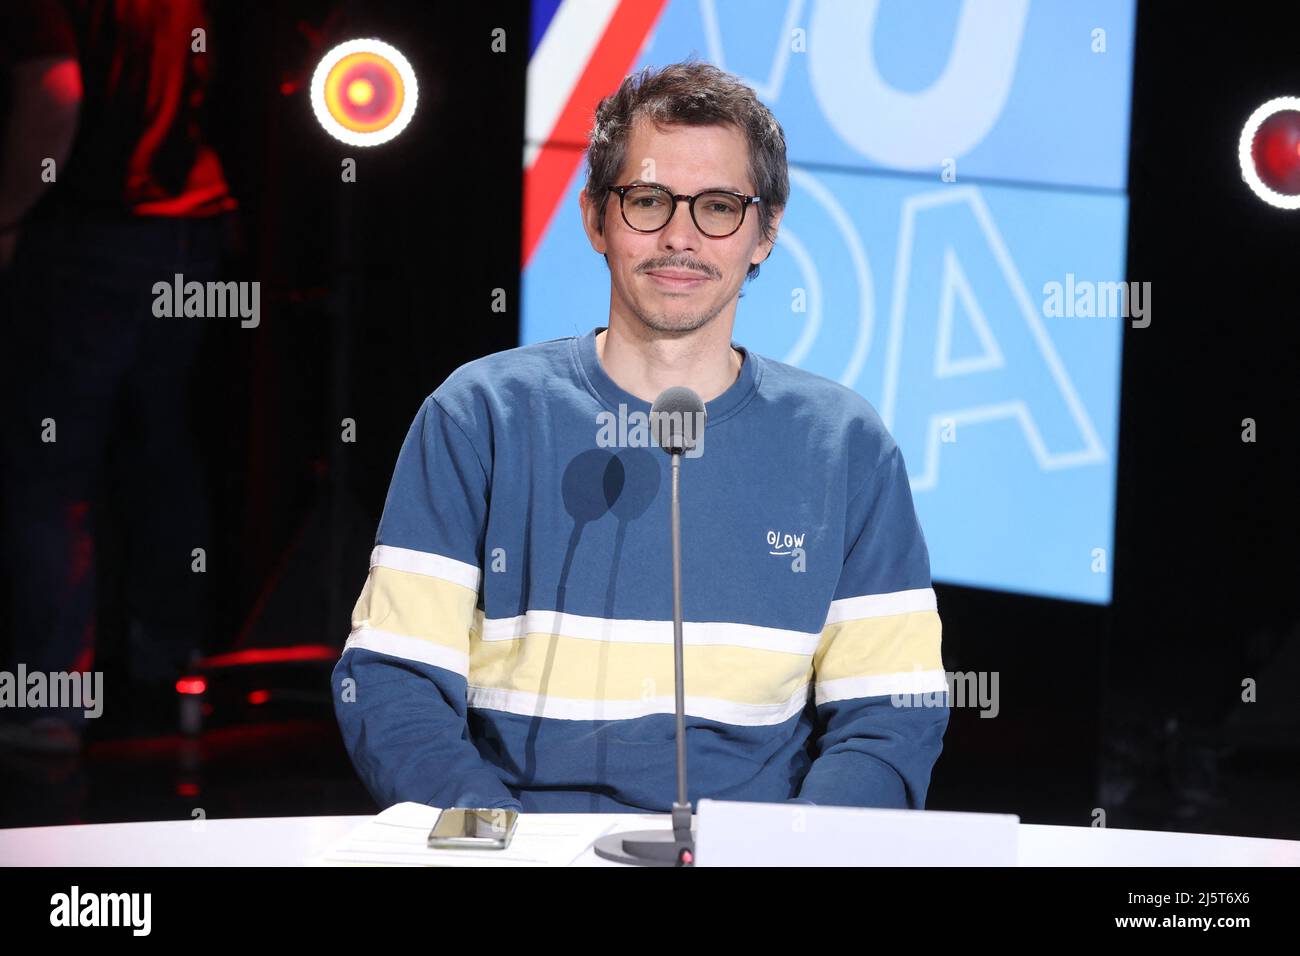 Exclusive - Thomas Porcher at the 'Les Grandes Gueules' talk show on RMC  Radio, in Paris, France, on April 25, 2022. Photo by Jerome  Domine/ABACAPRESS.COM Stock Photo - Alamy